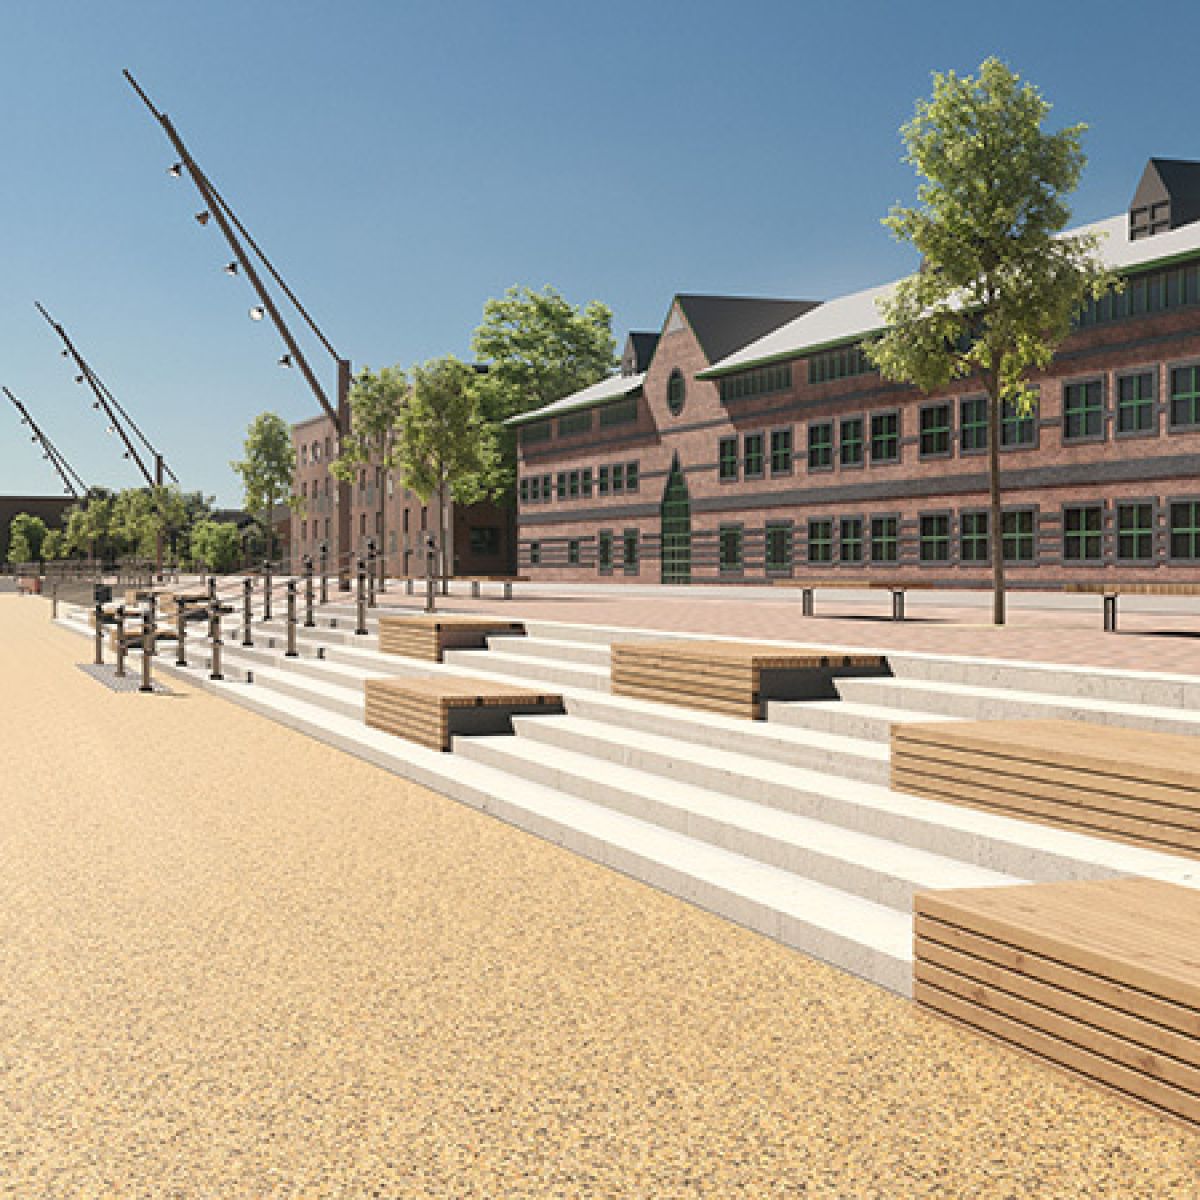 A transformed Queens Gardens will provide a new landscape and seating